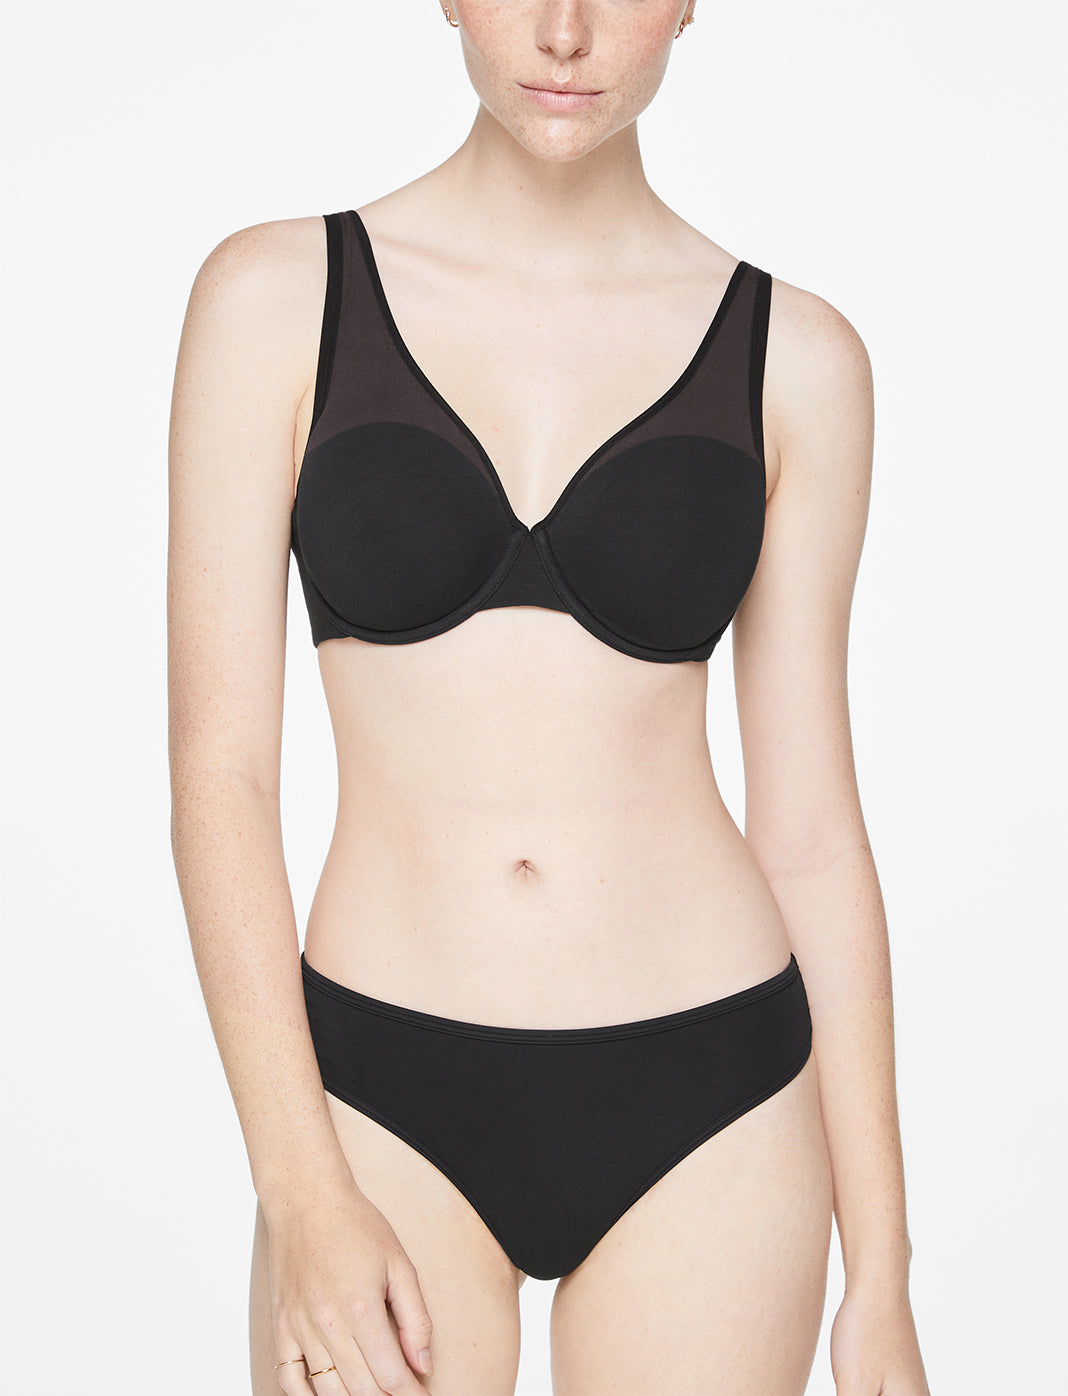 Got Bra-blems? ThirdLove's Five Solutions To Finding a Bra That Fits